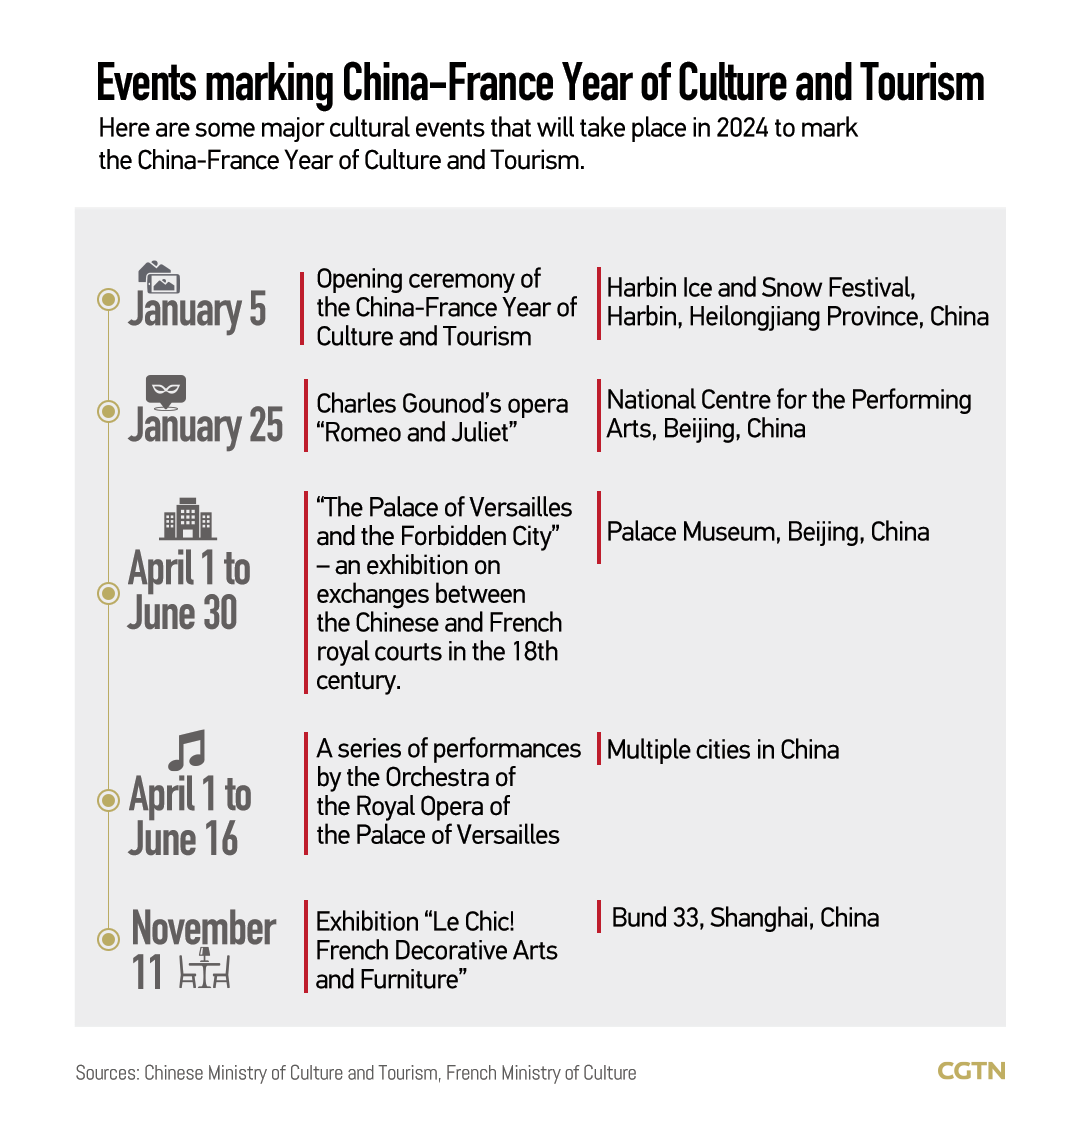 Graphics: 2024 marks China-France Year of Culture and Tourism